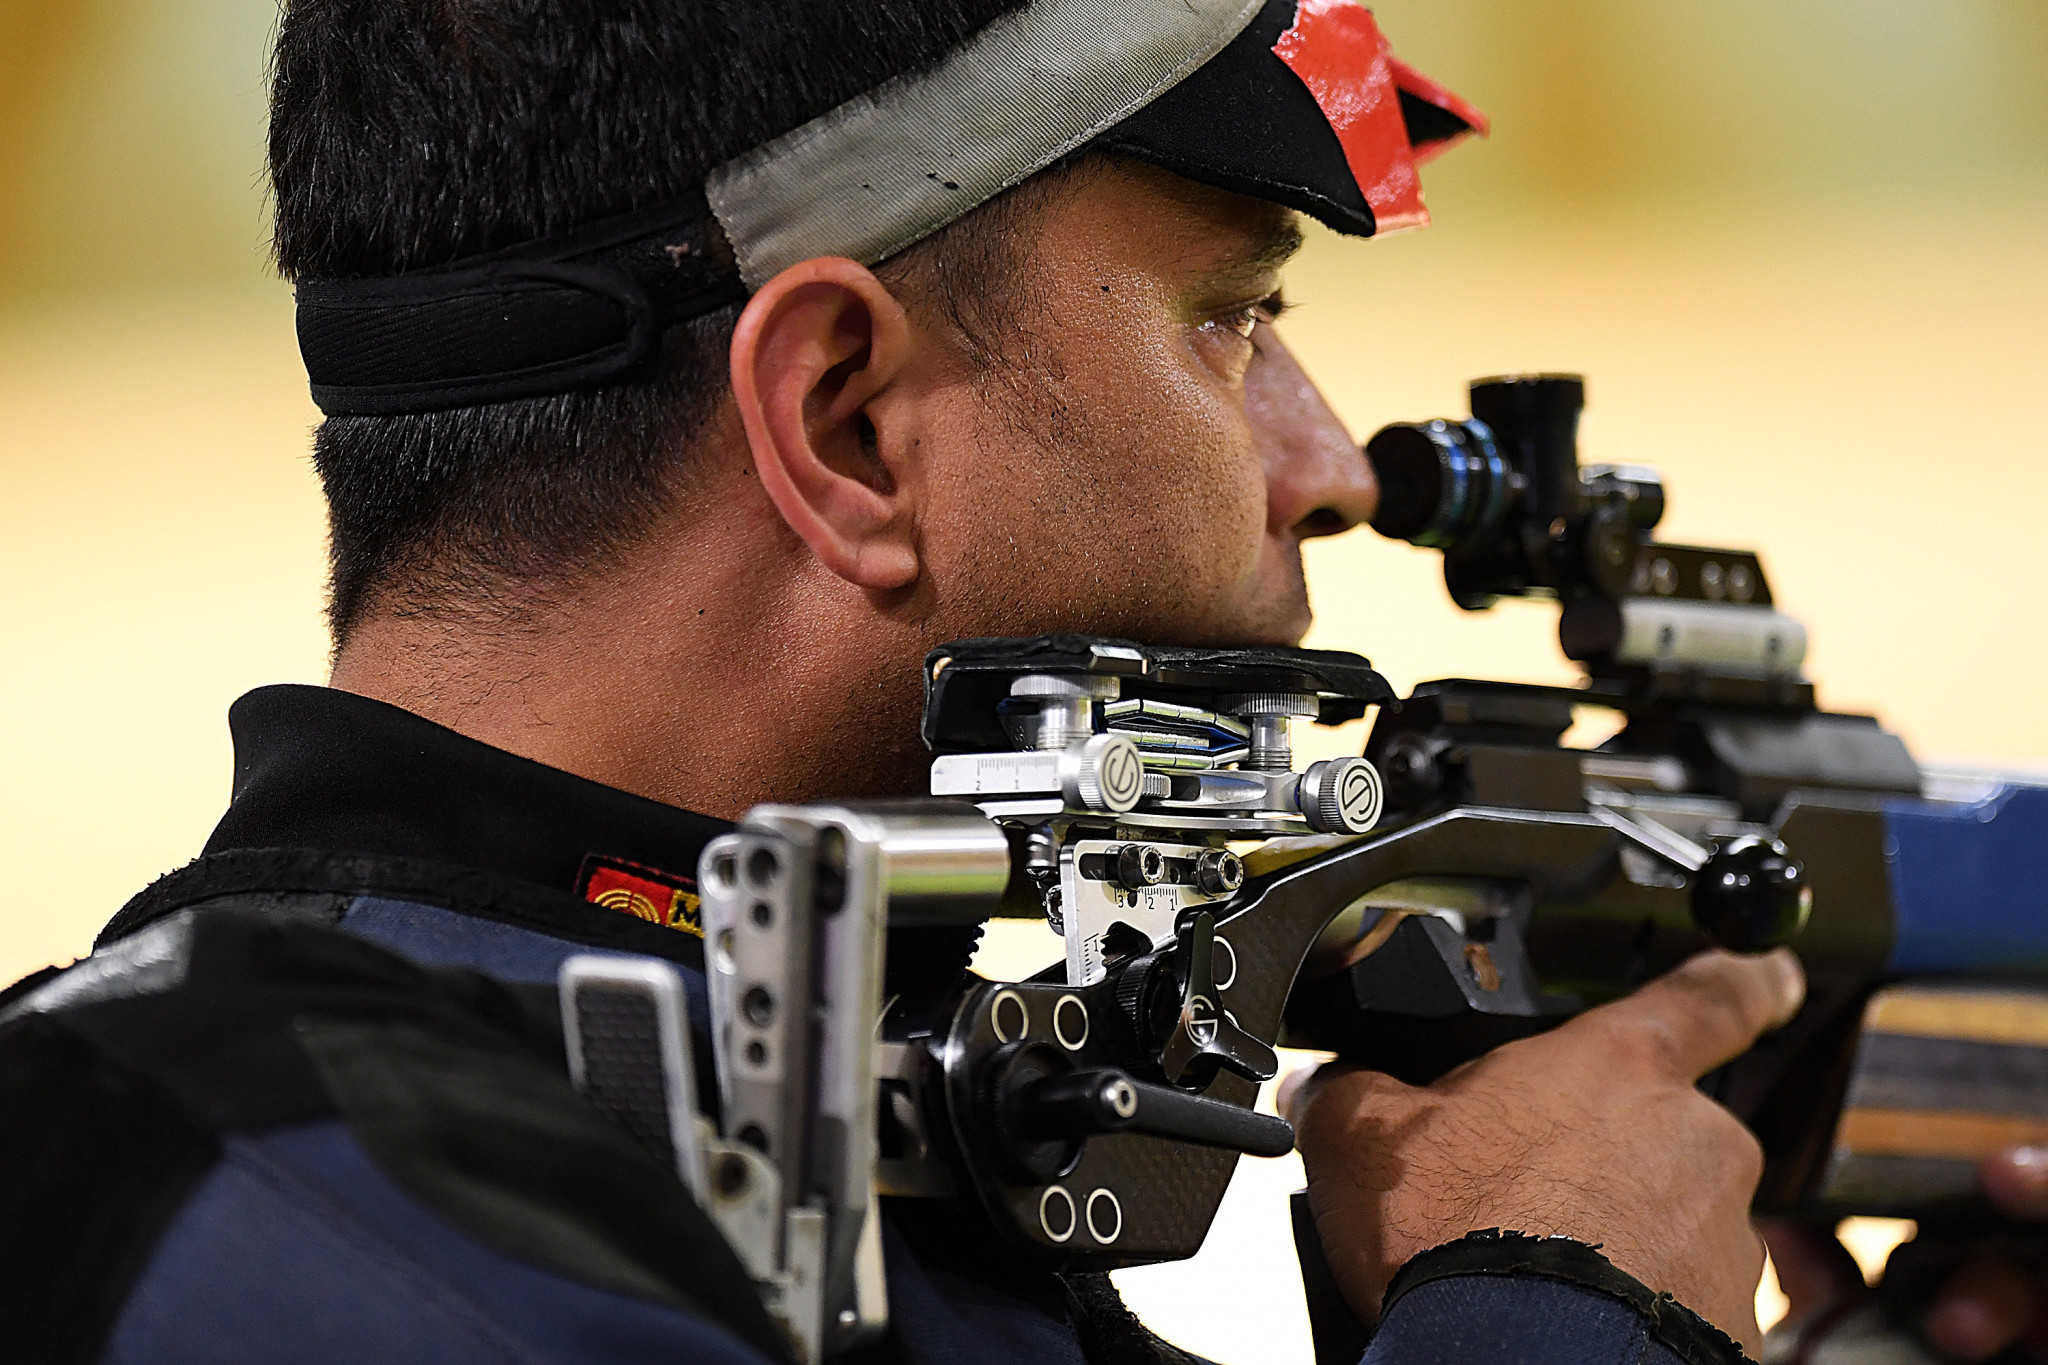 A Commonwealth Games shooting medal event could be held in India before Birmingham 2022 ©Getty Images